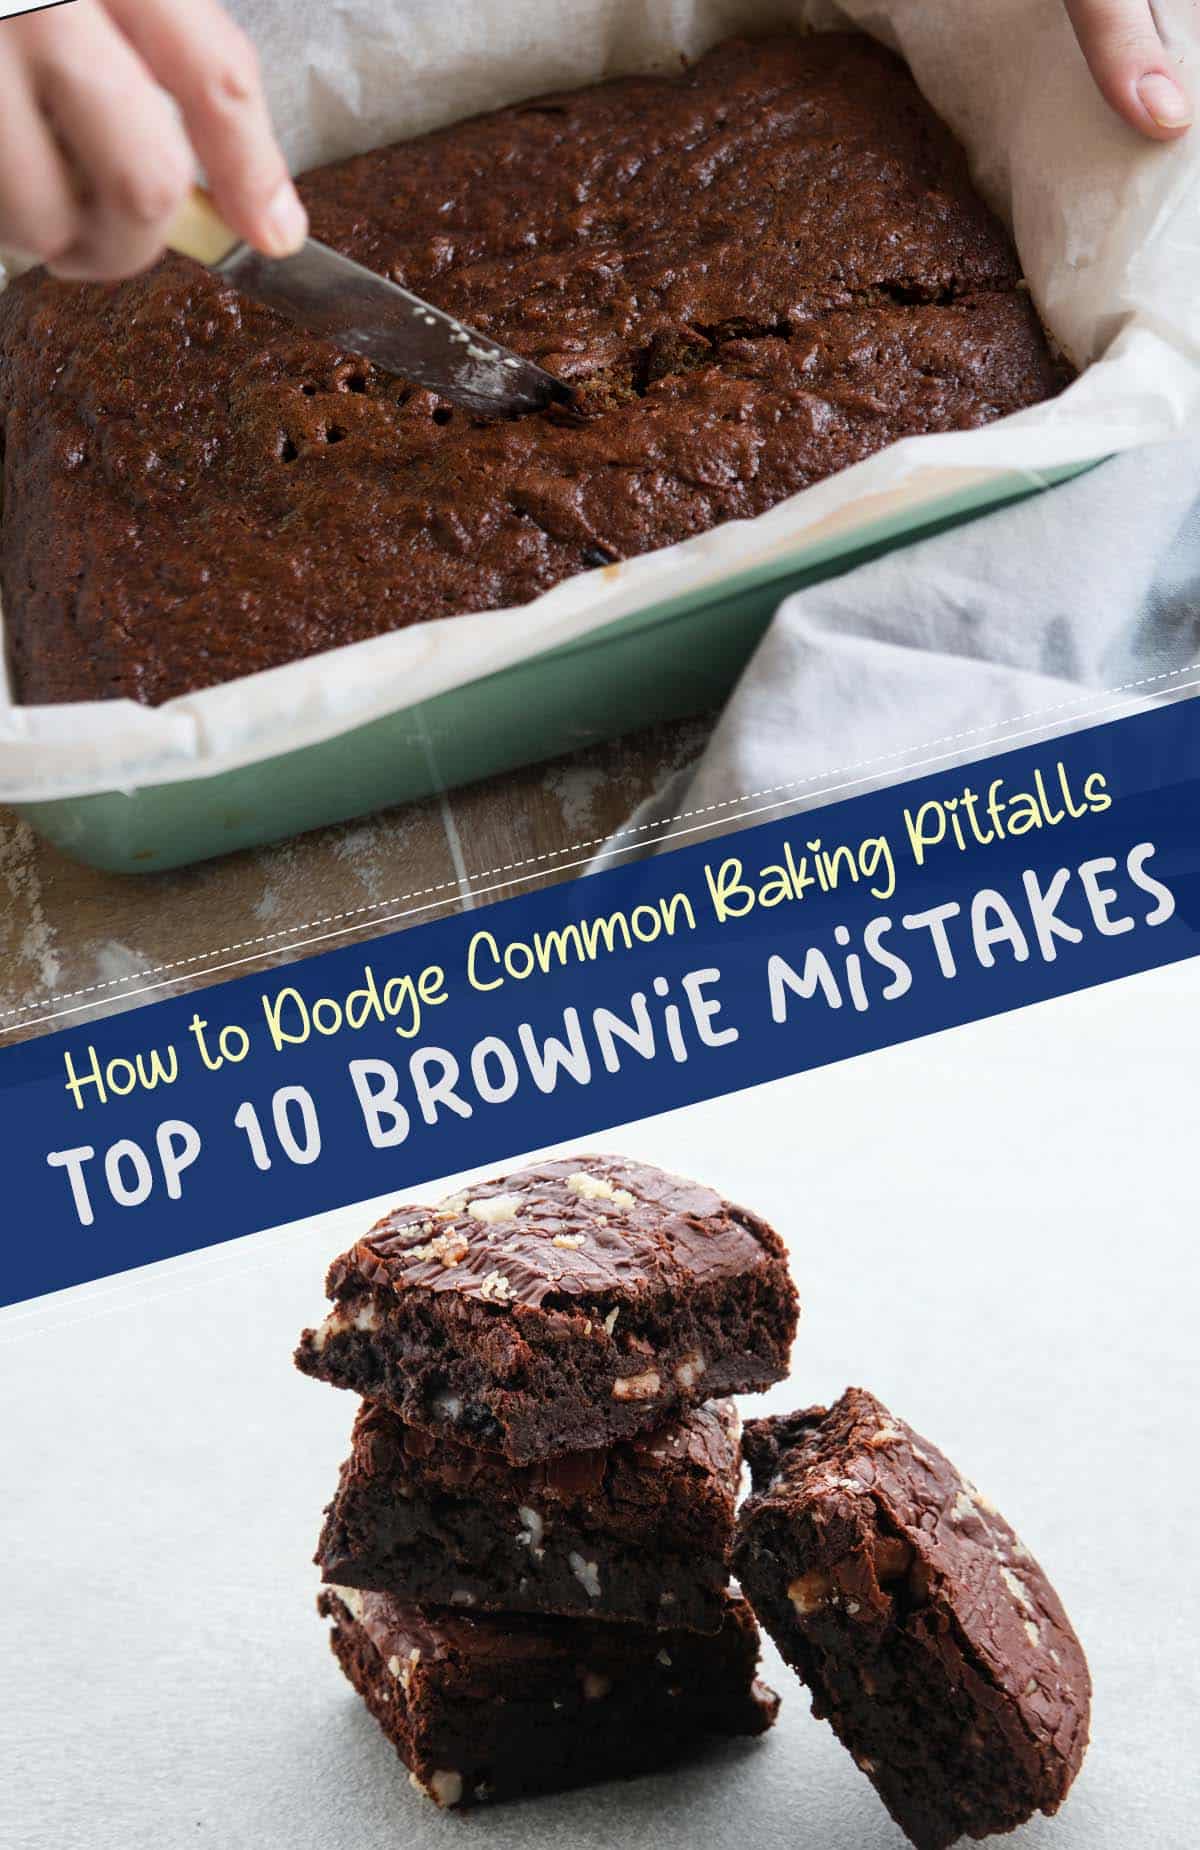 Master the art of brownie baking by avoiding these 10 common mistakes. Learn from our expert tips to achieve perfectly moist, delicious brownies every time.